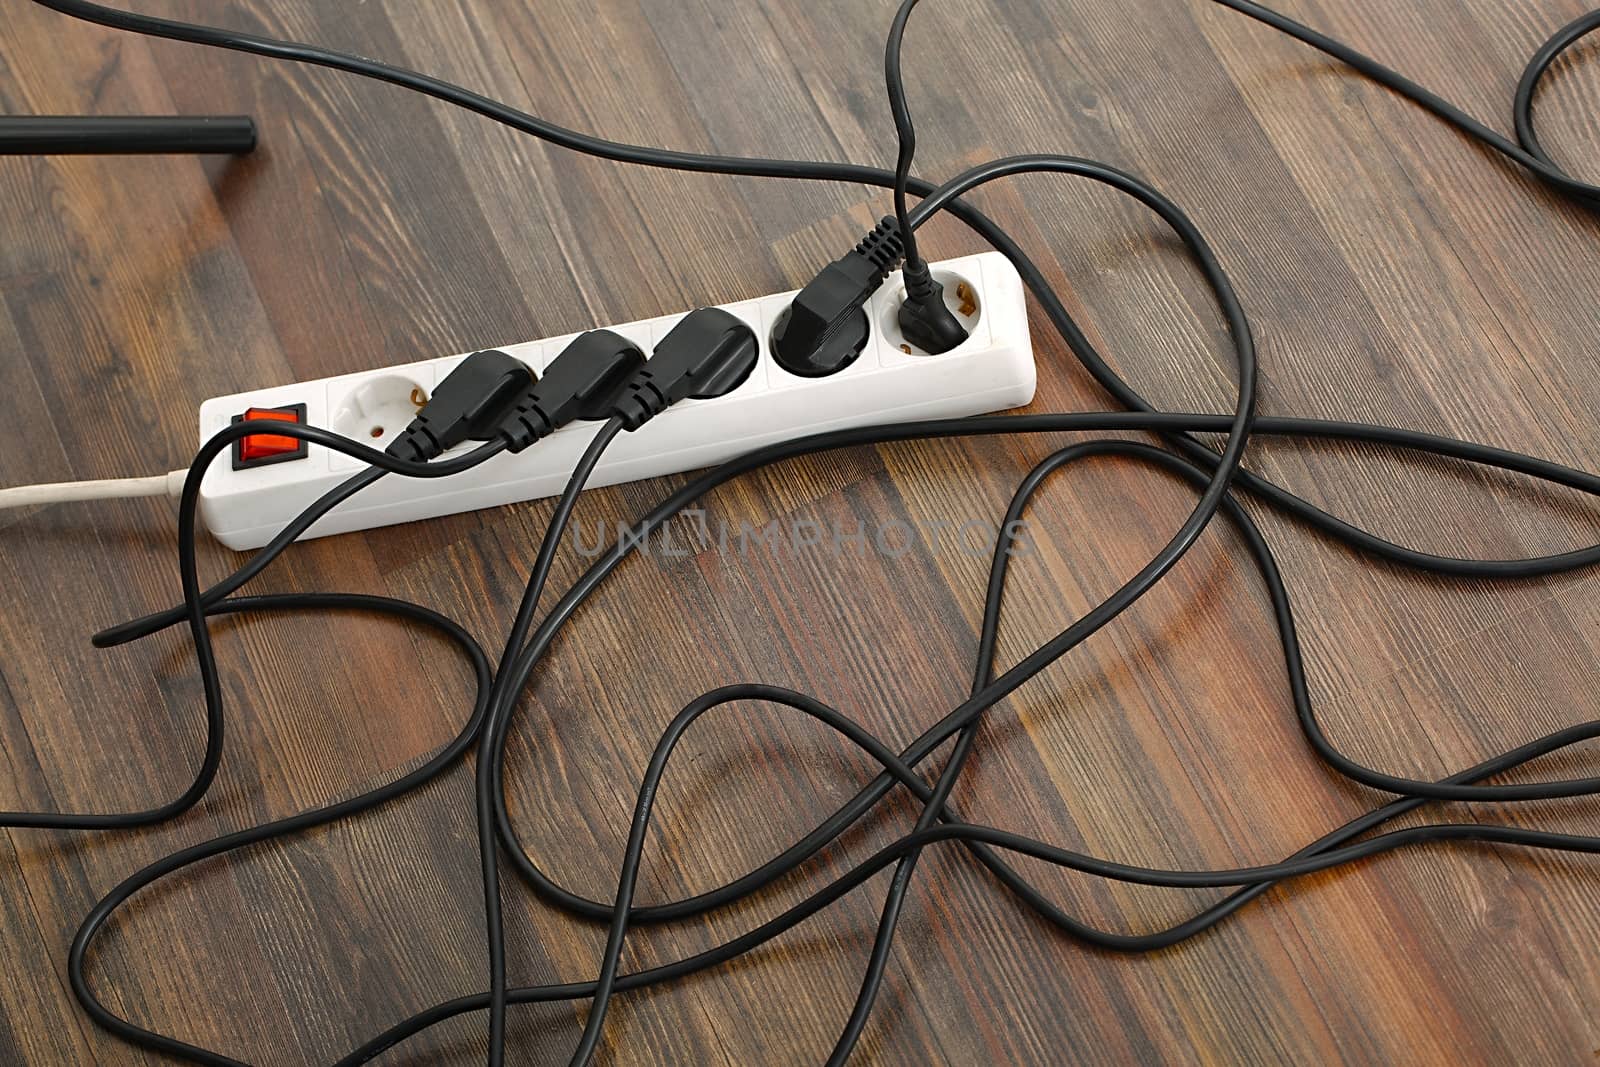 Plugged in electric devices in an extension cord